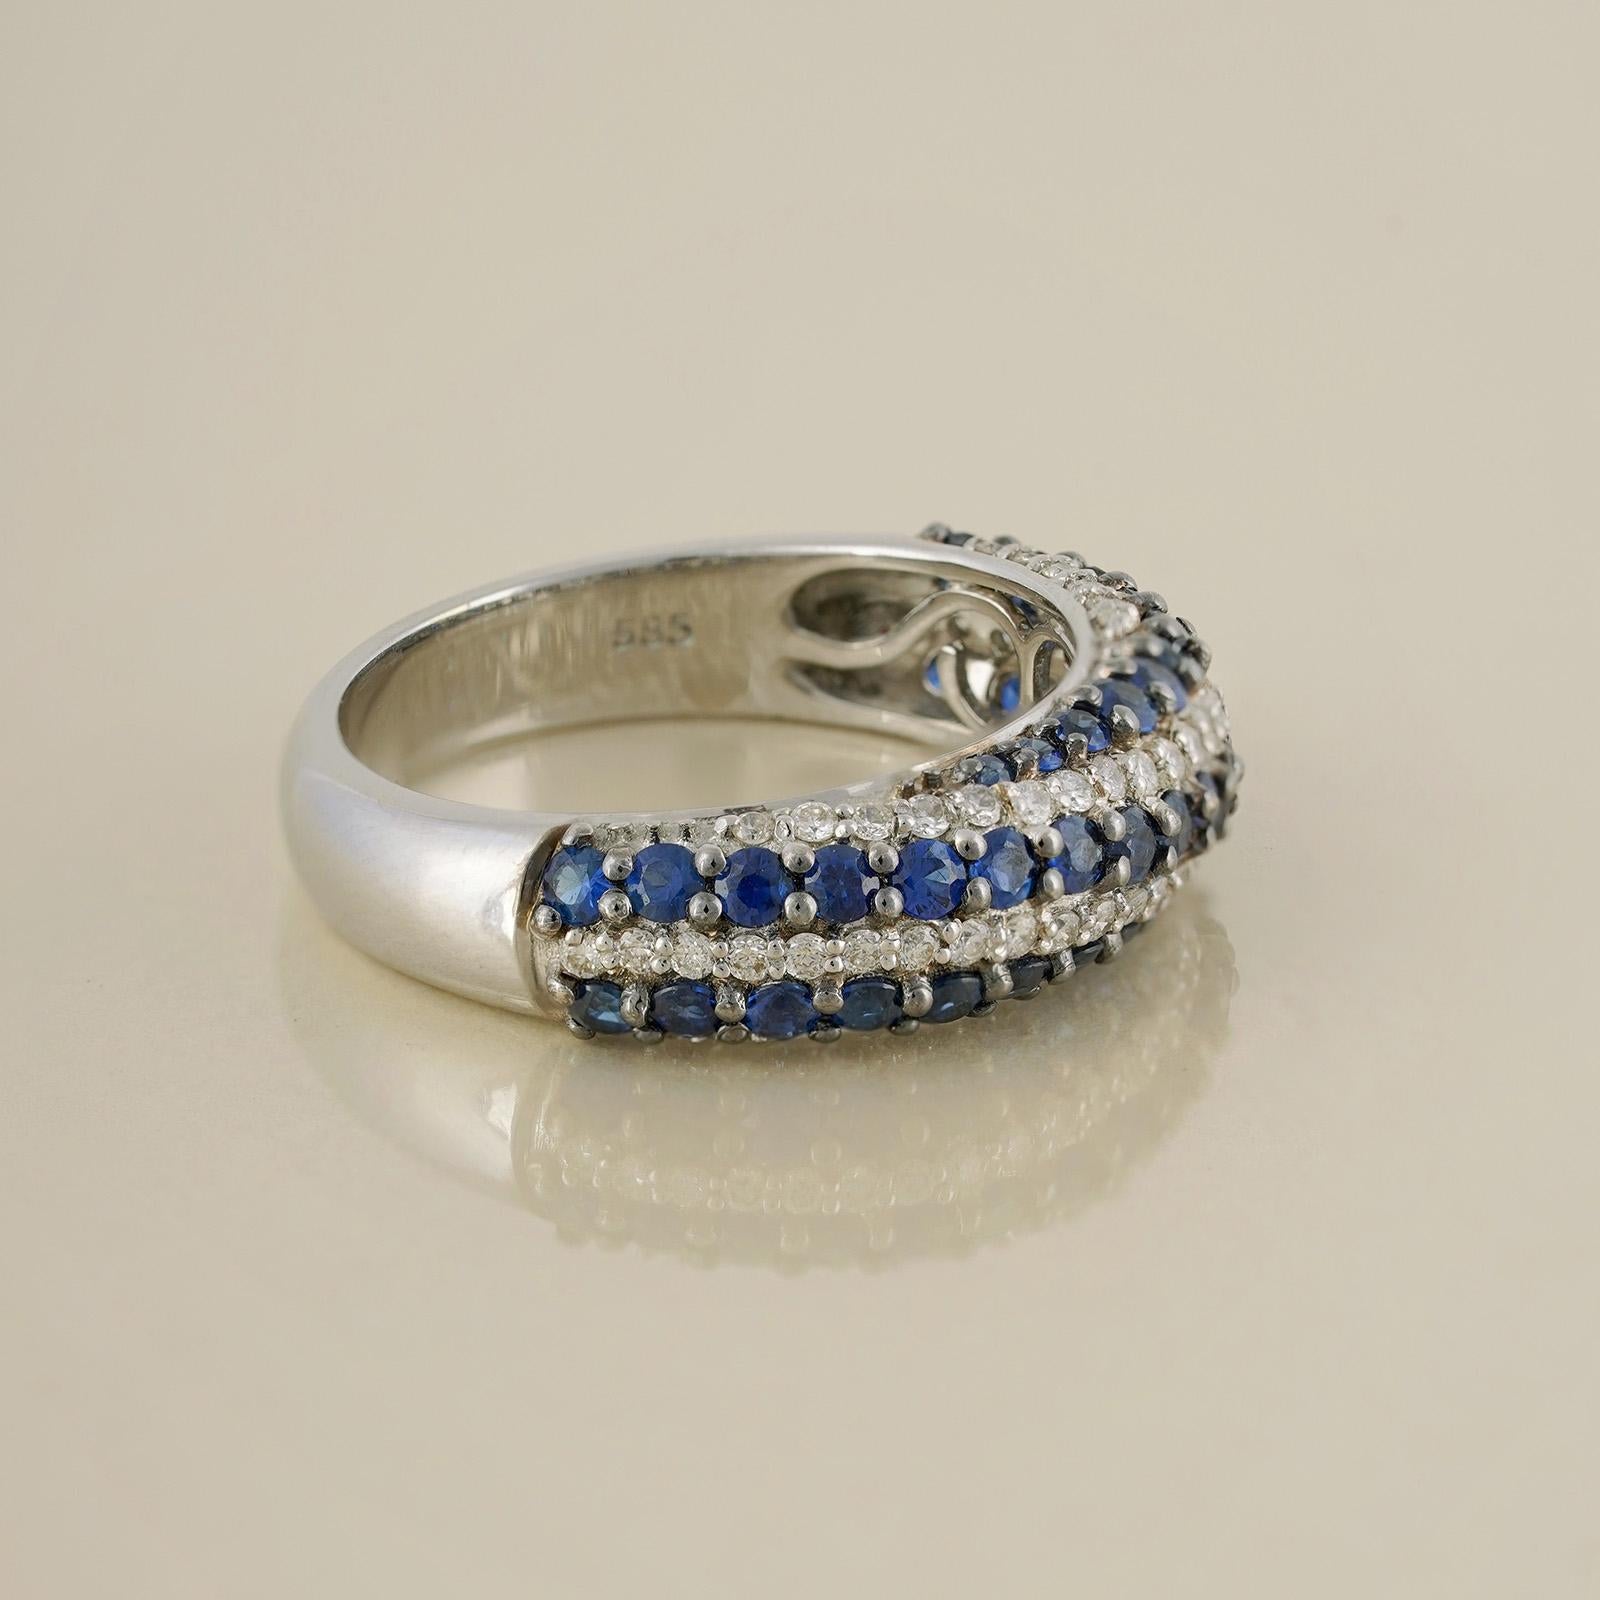 For Sale:  Moi Susan Gold Diamond and Blue Sapphire Band Ring 4